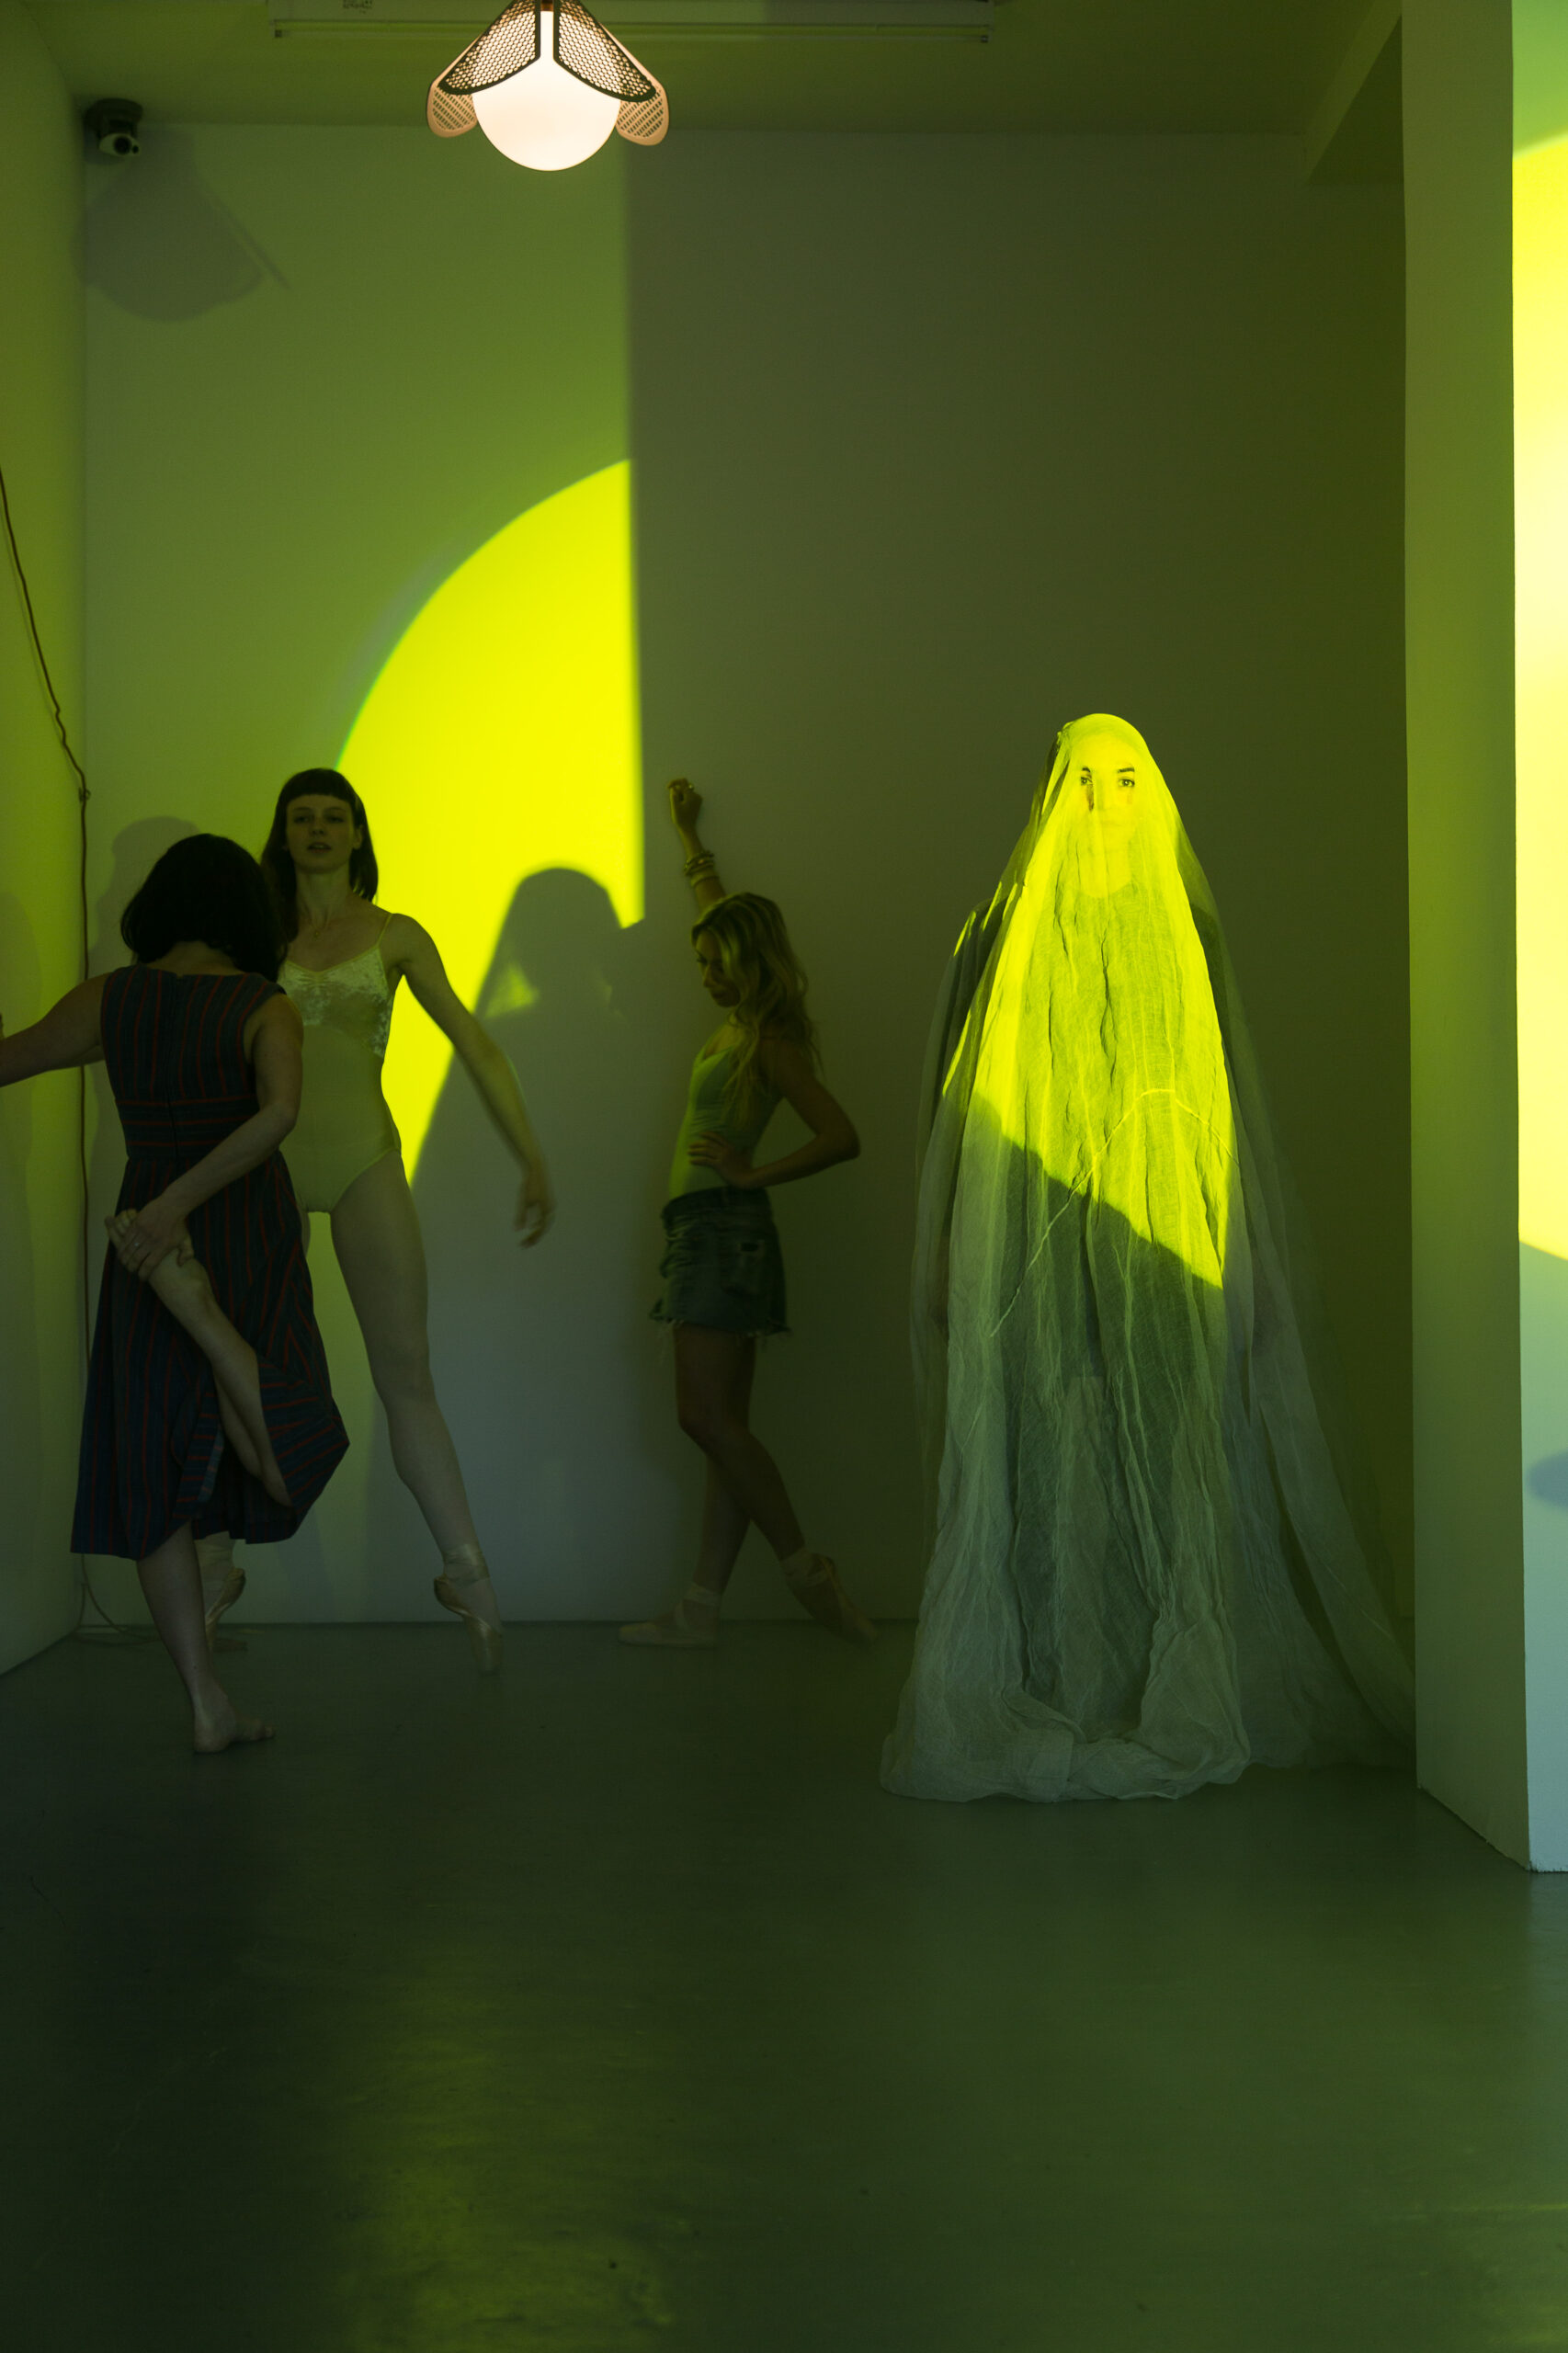 Previous performance of Witch Dance, 2012